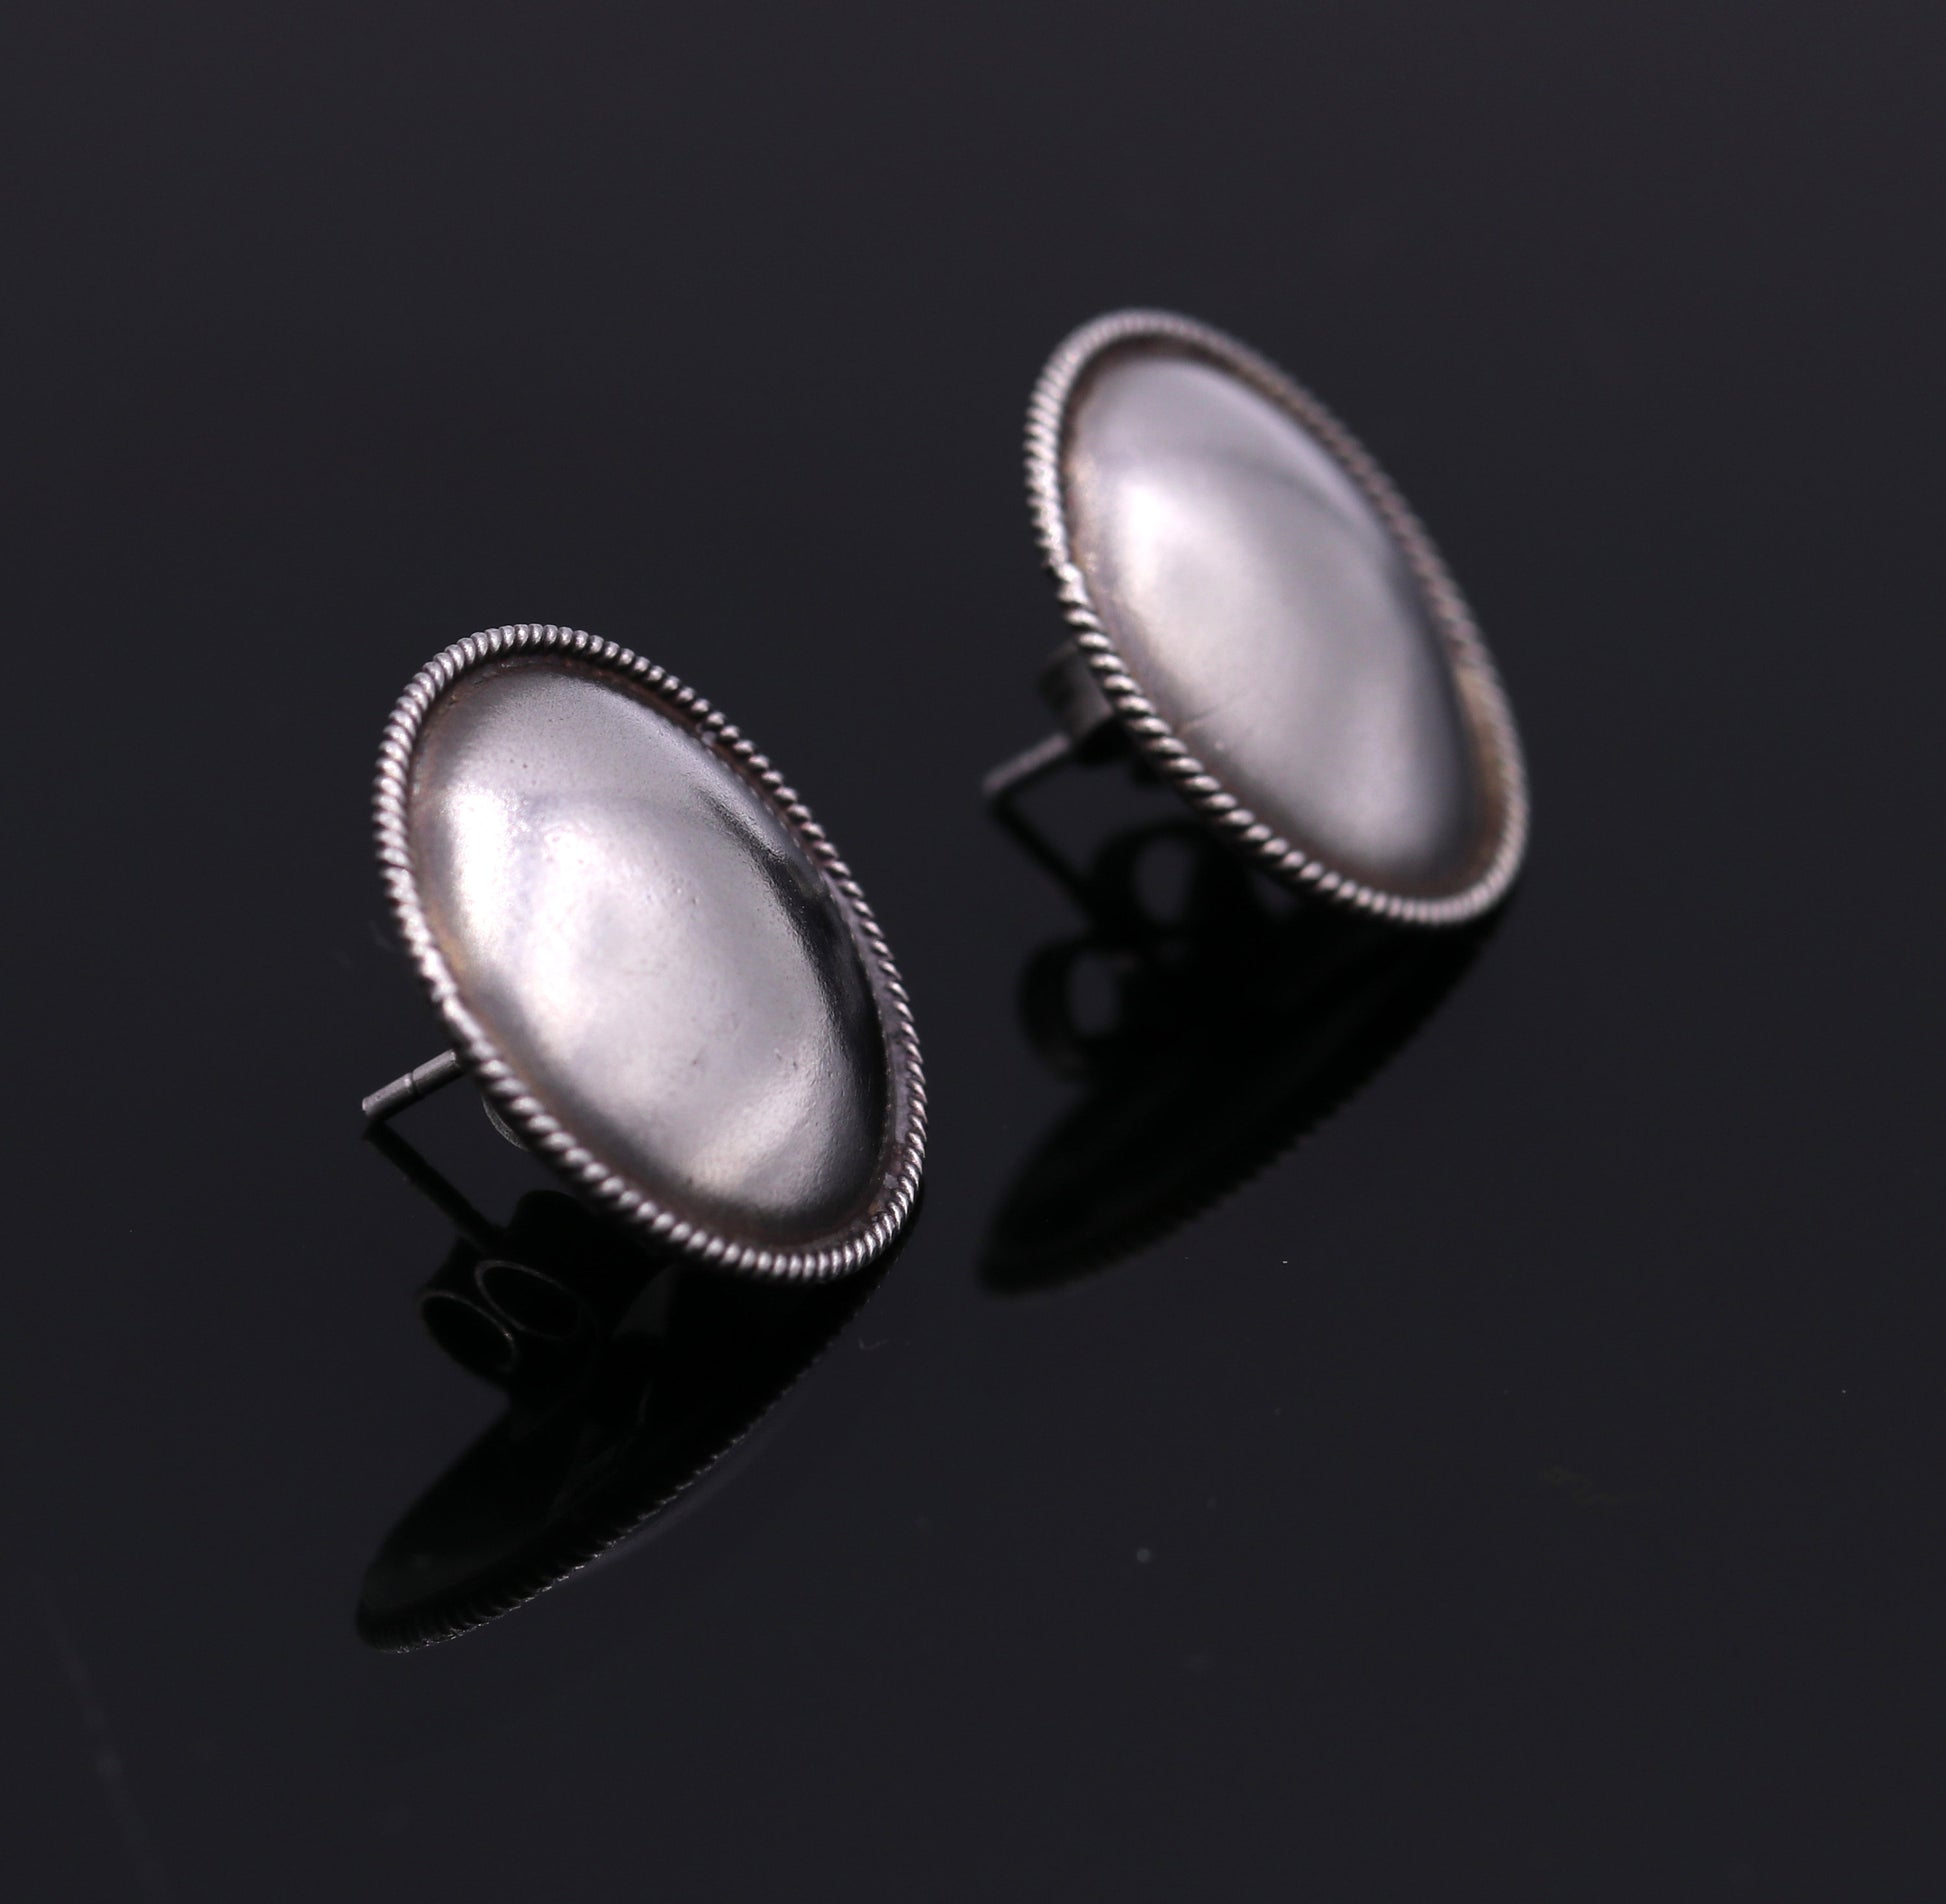 Vintage design 925 sterling silver plain style handmade round design fabulous Stud earrings tribal jewelry from Rajasthan india  s523 - TRIBAL ORNAMENTS